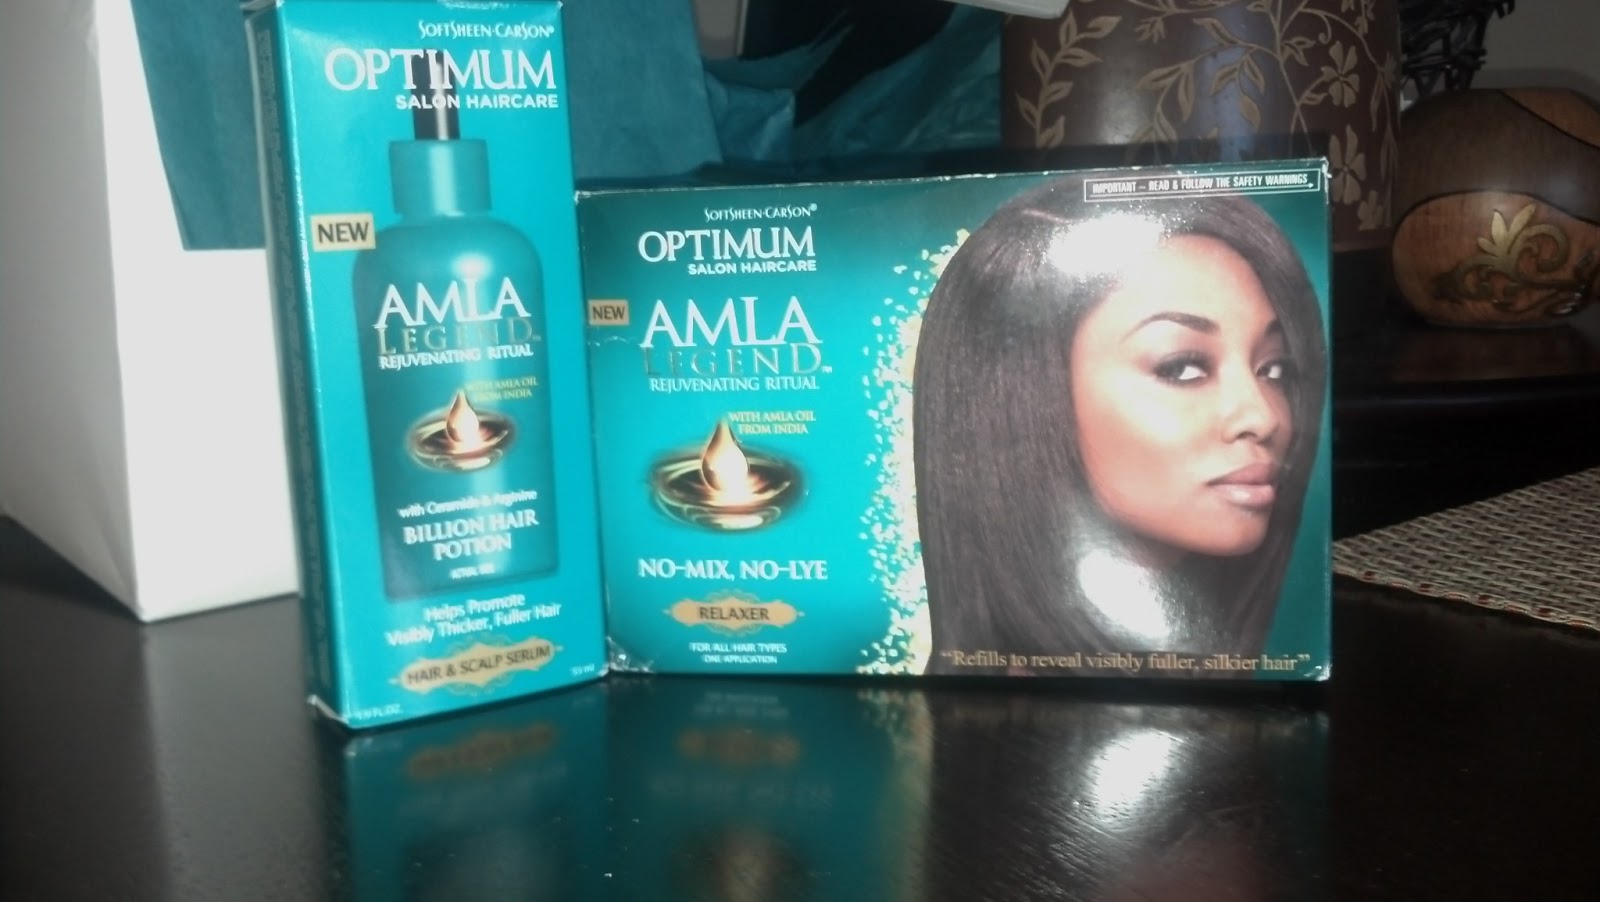 Sdestra Switching To A New Hair Relaxer Optimum Salon HairCare